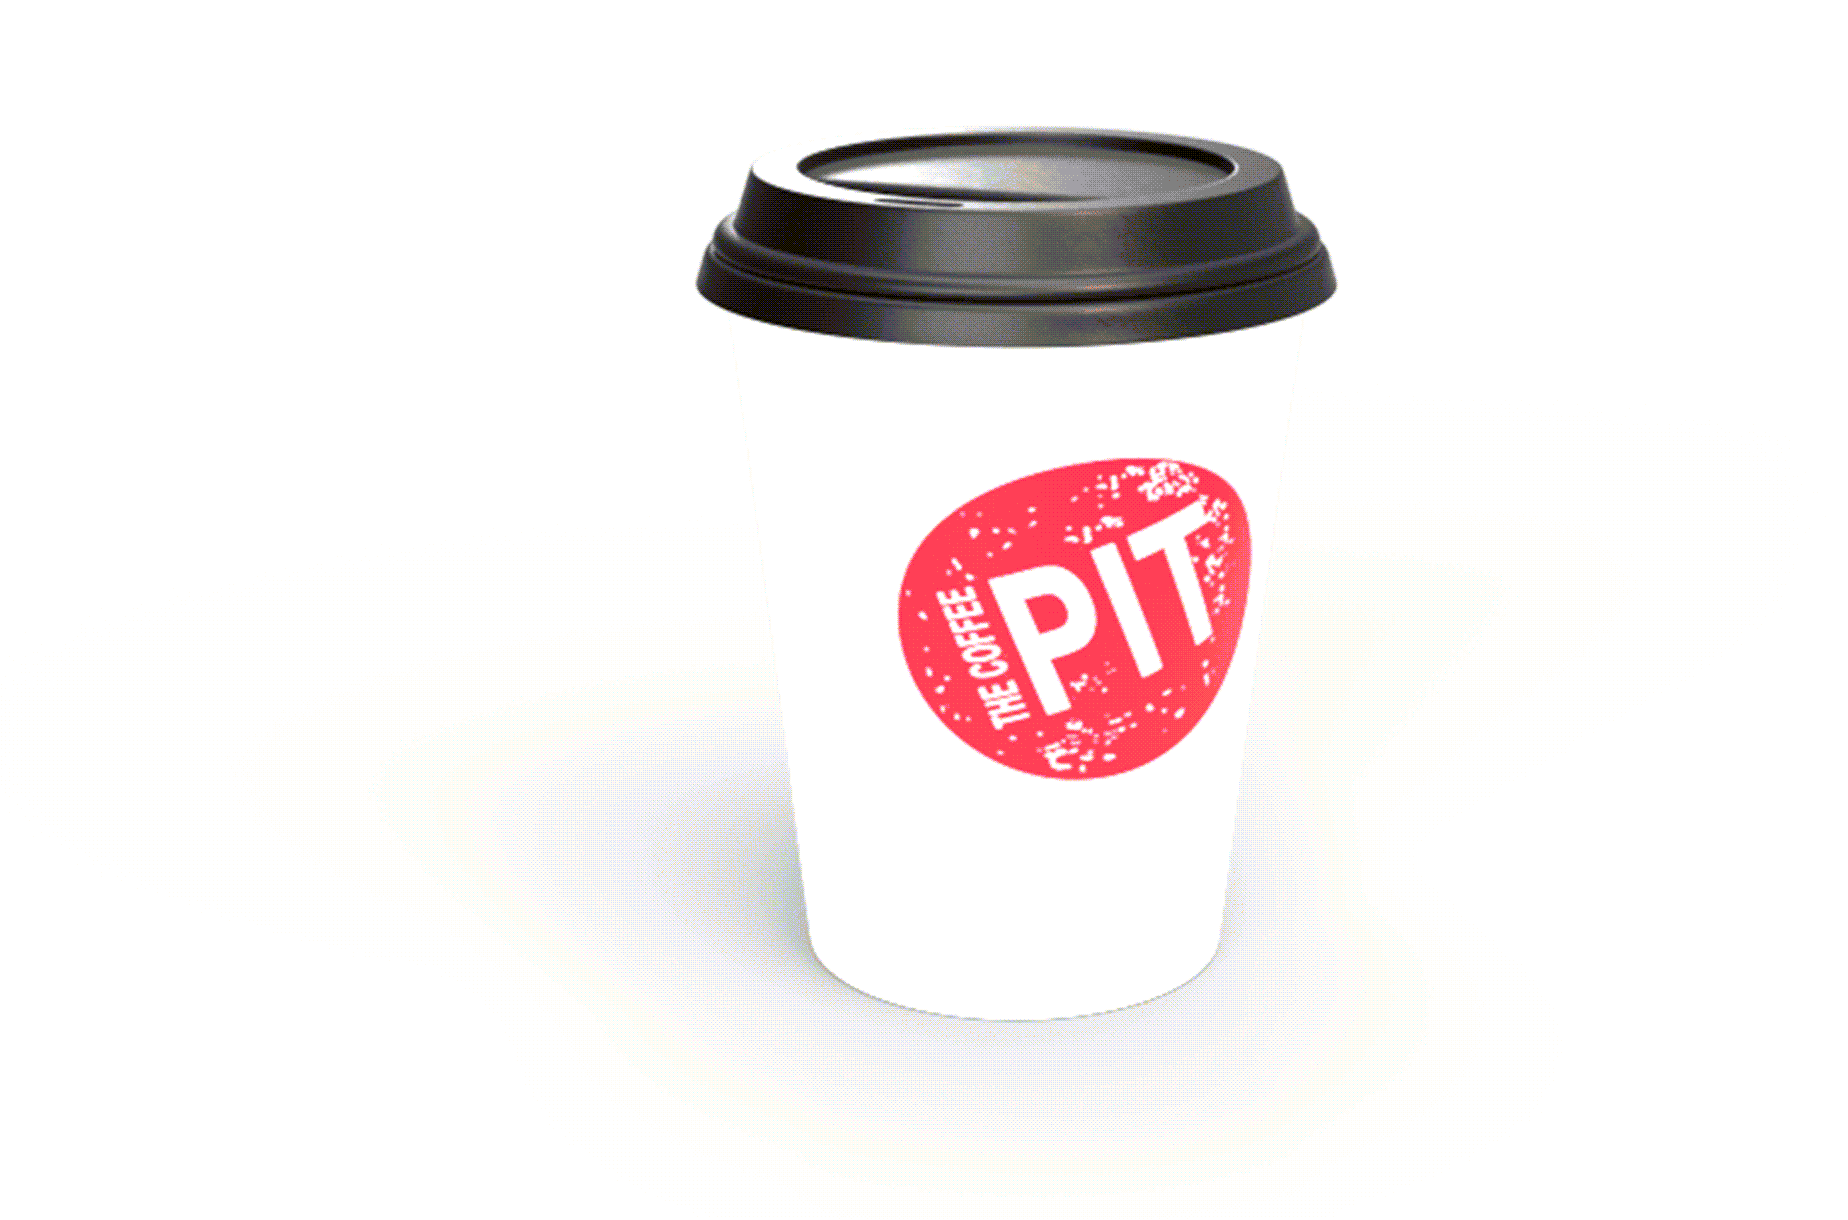 The Coffee Pit